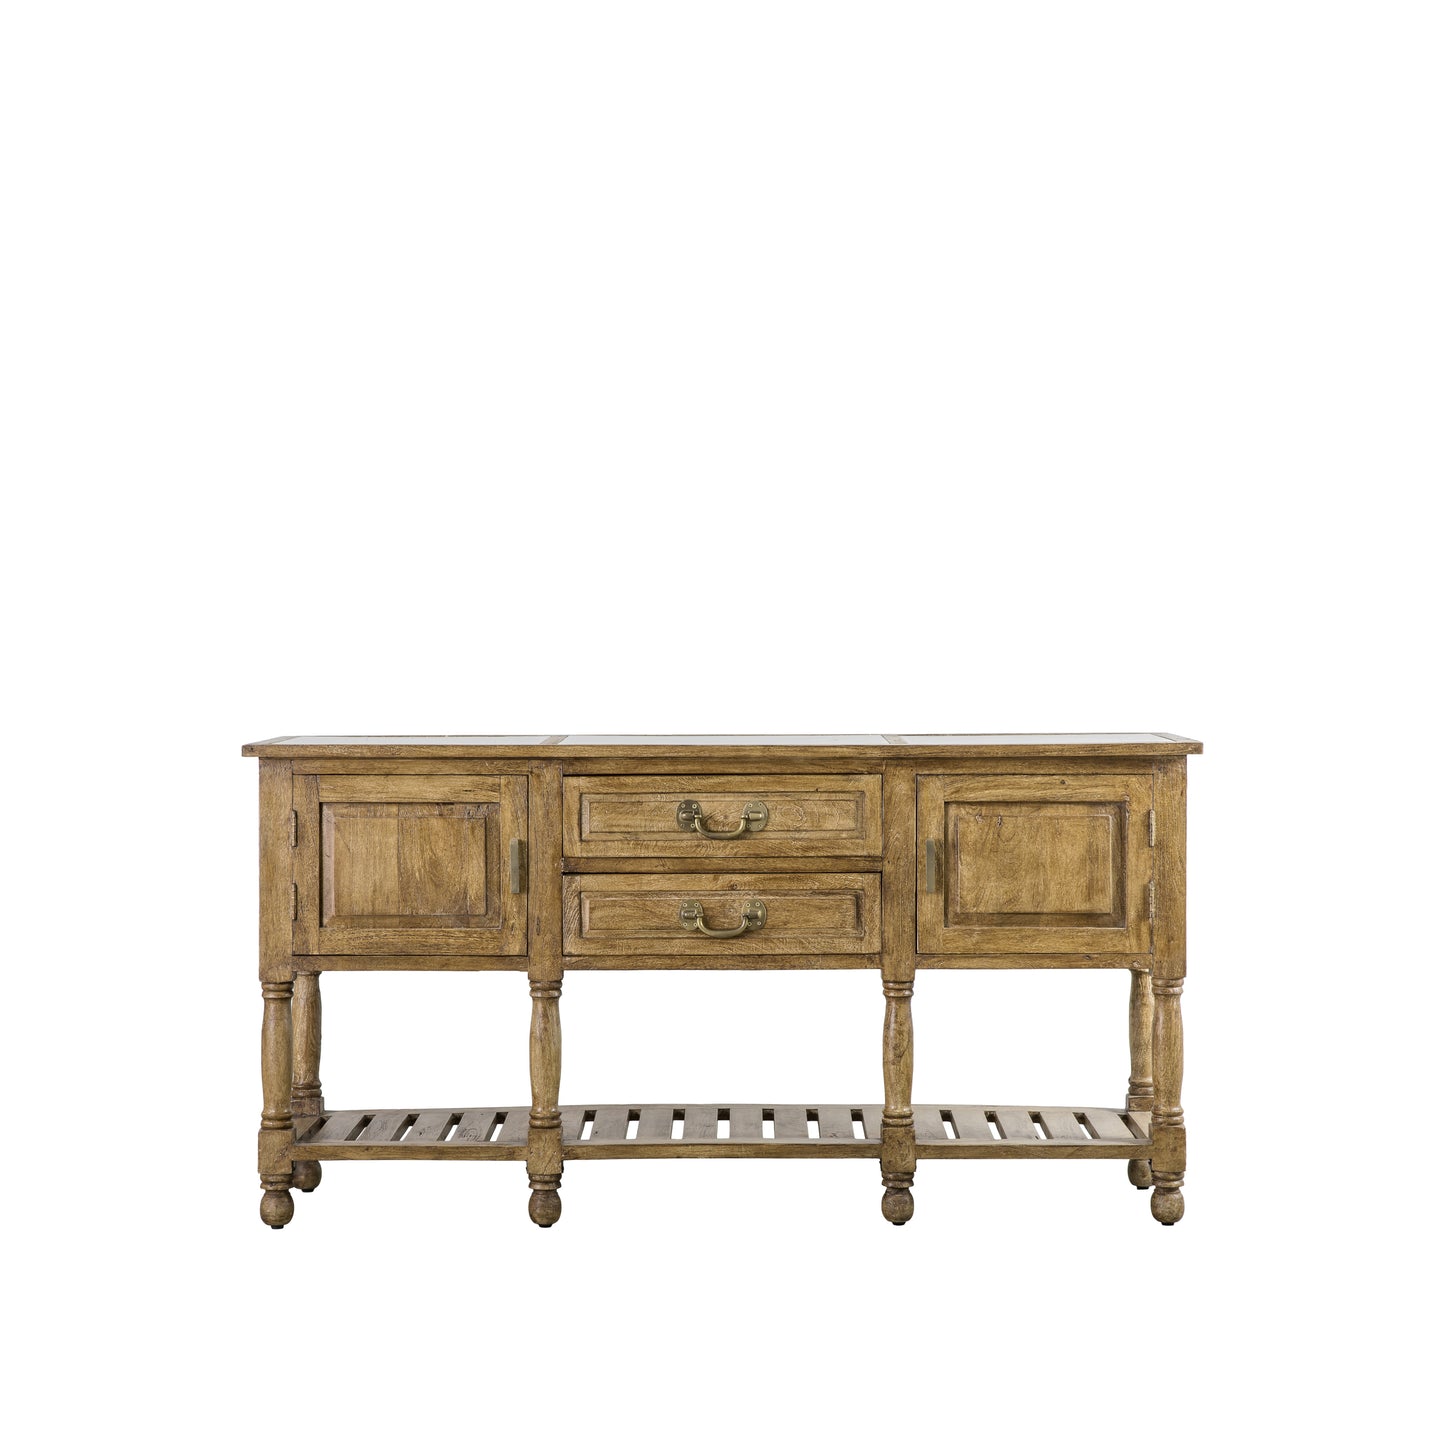 A Halwell 2 Drawer 2 Door Sideboard from Kikiathome.co.uk for interior decor and home furniture.